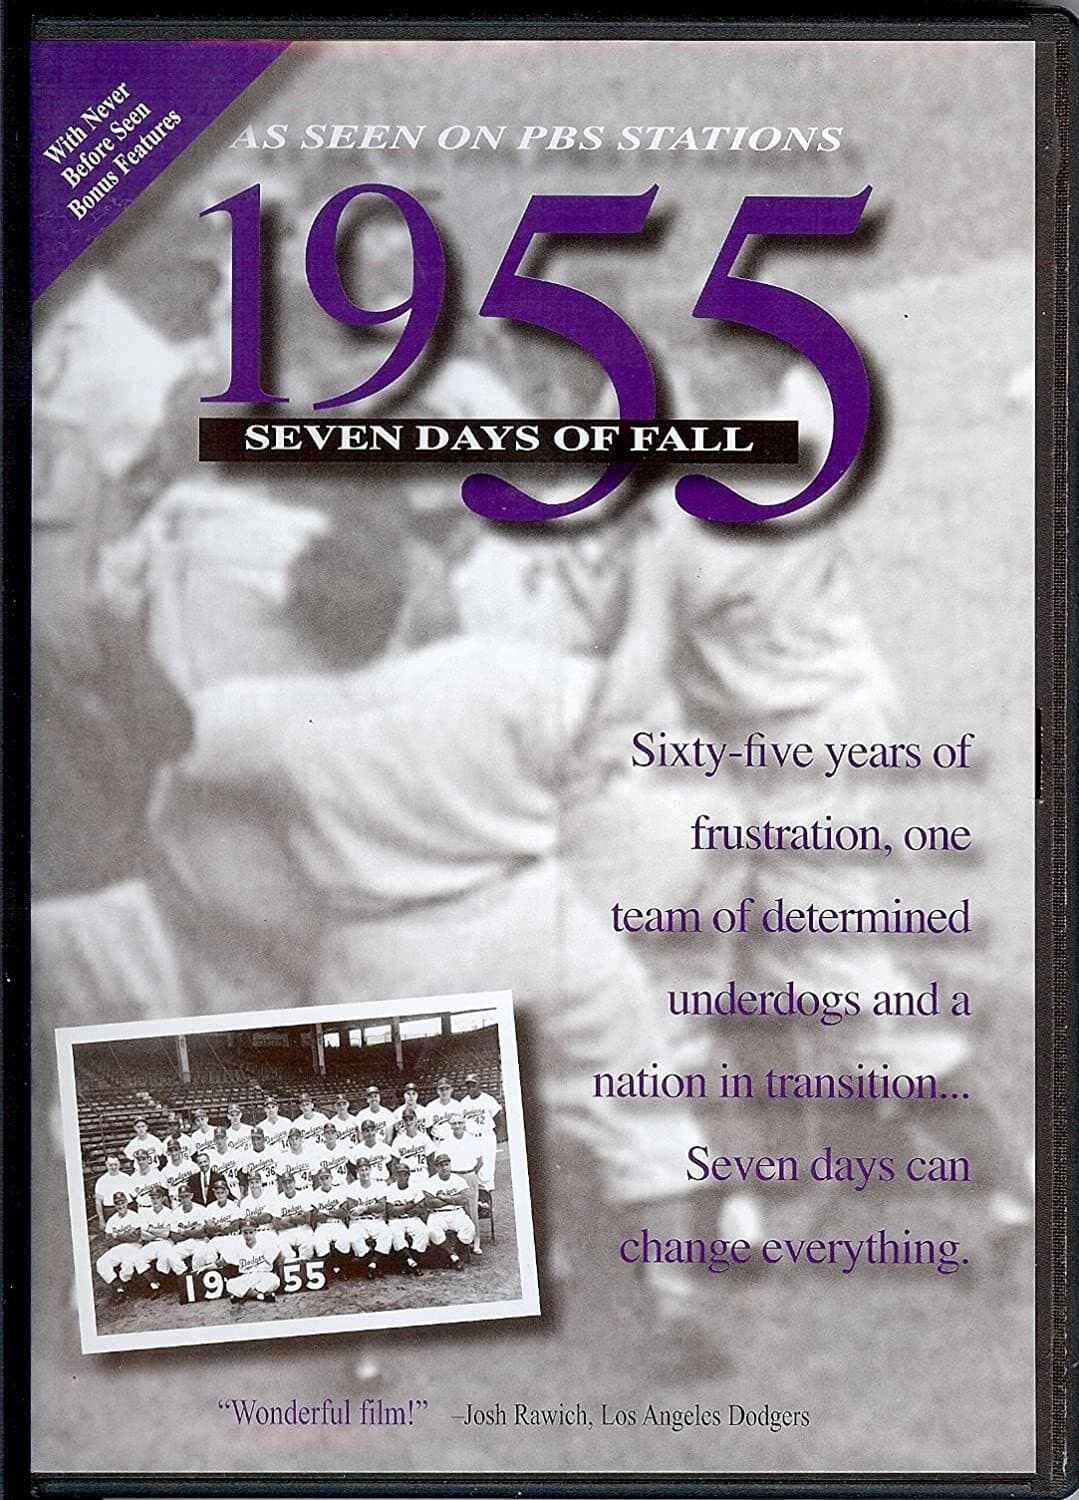 1955, Seven Days of Fall